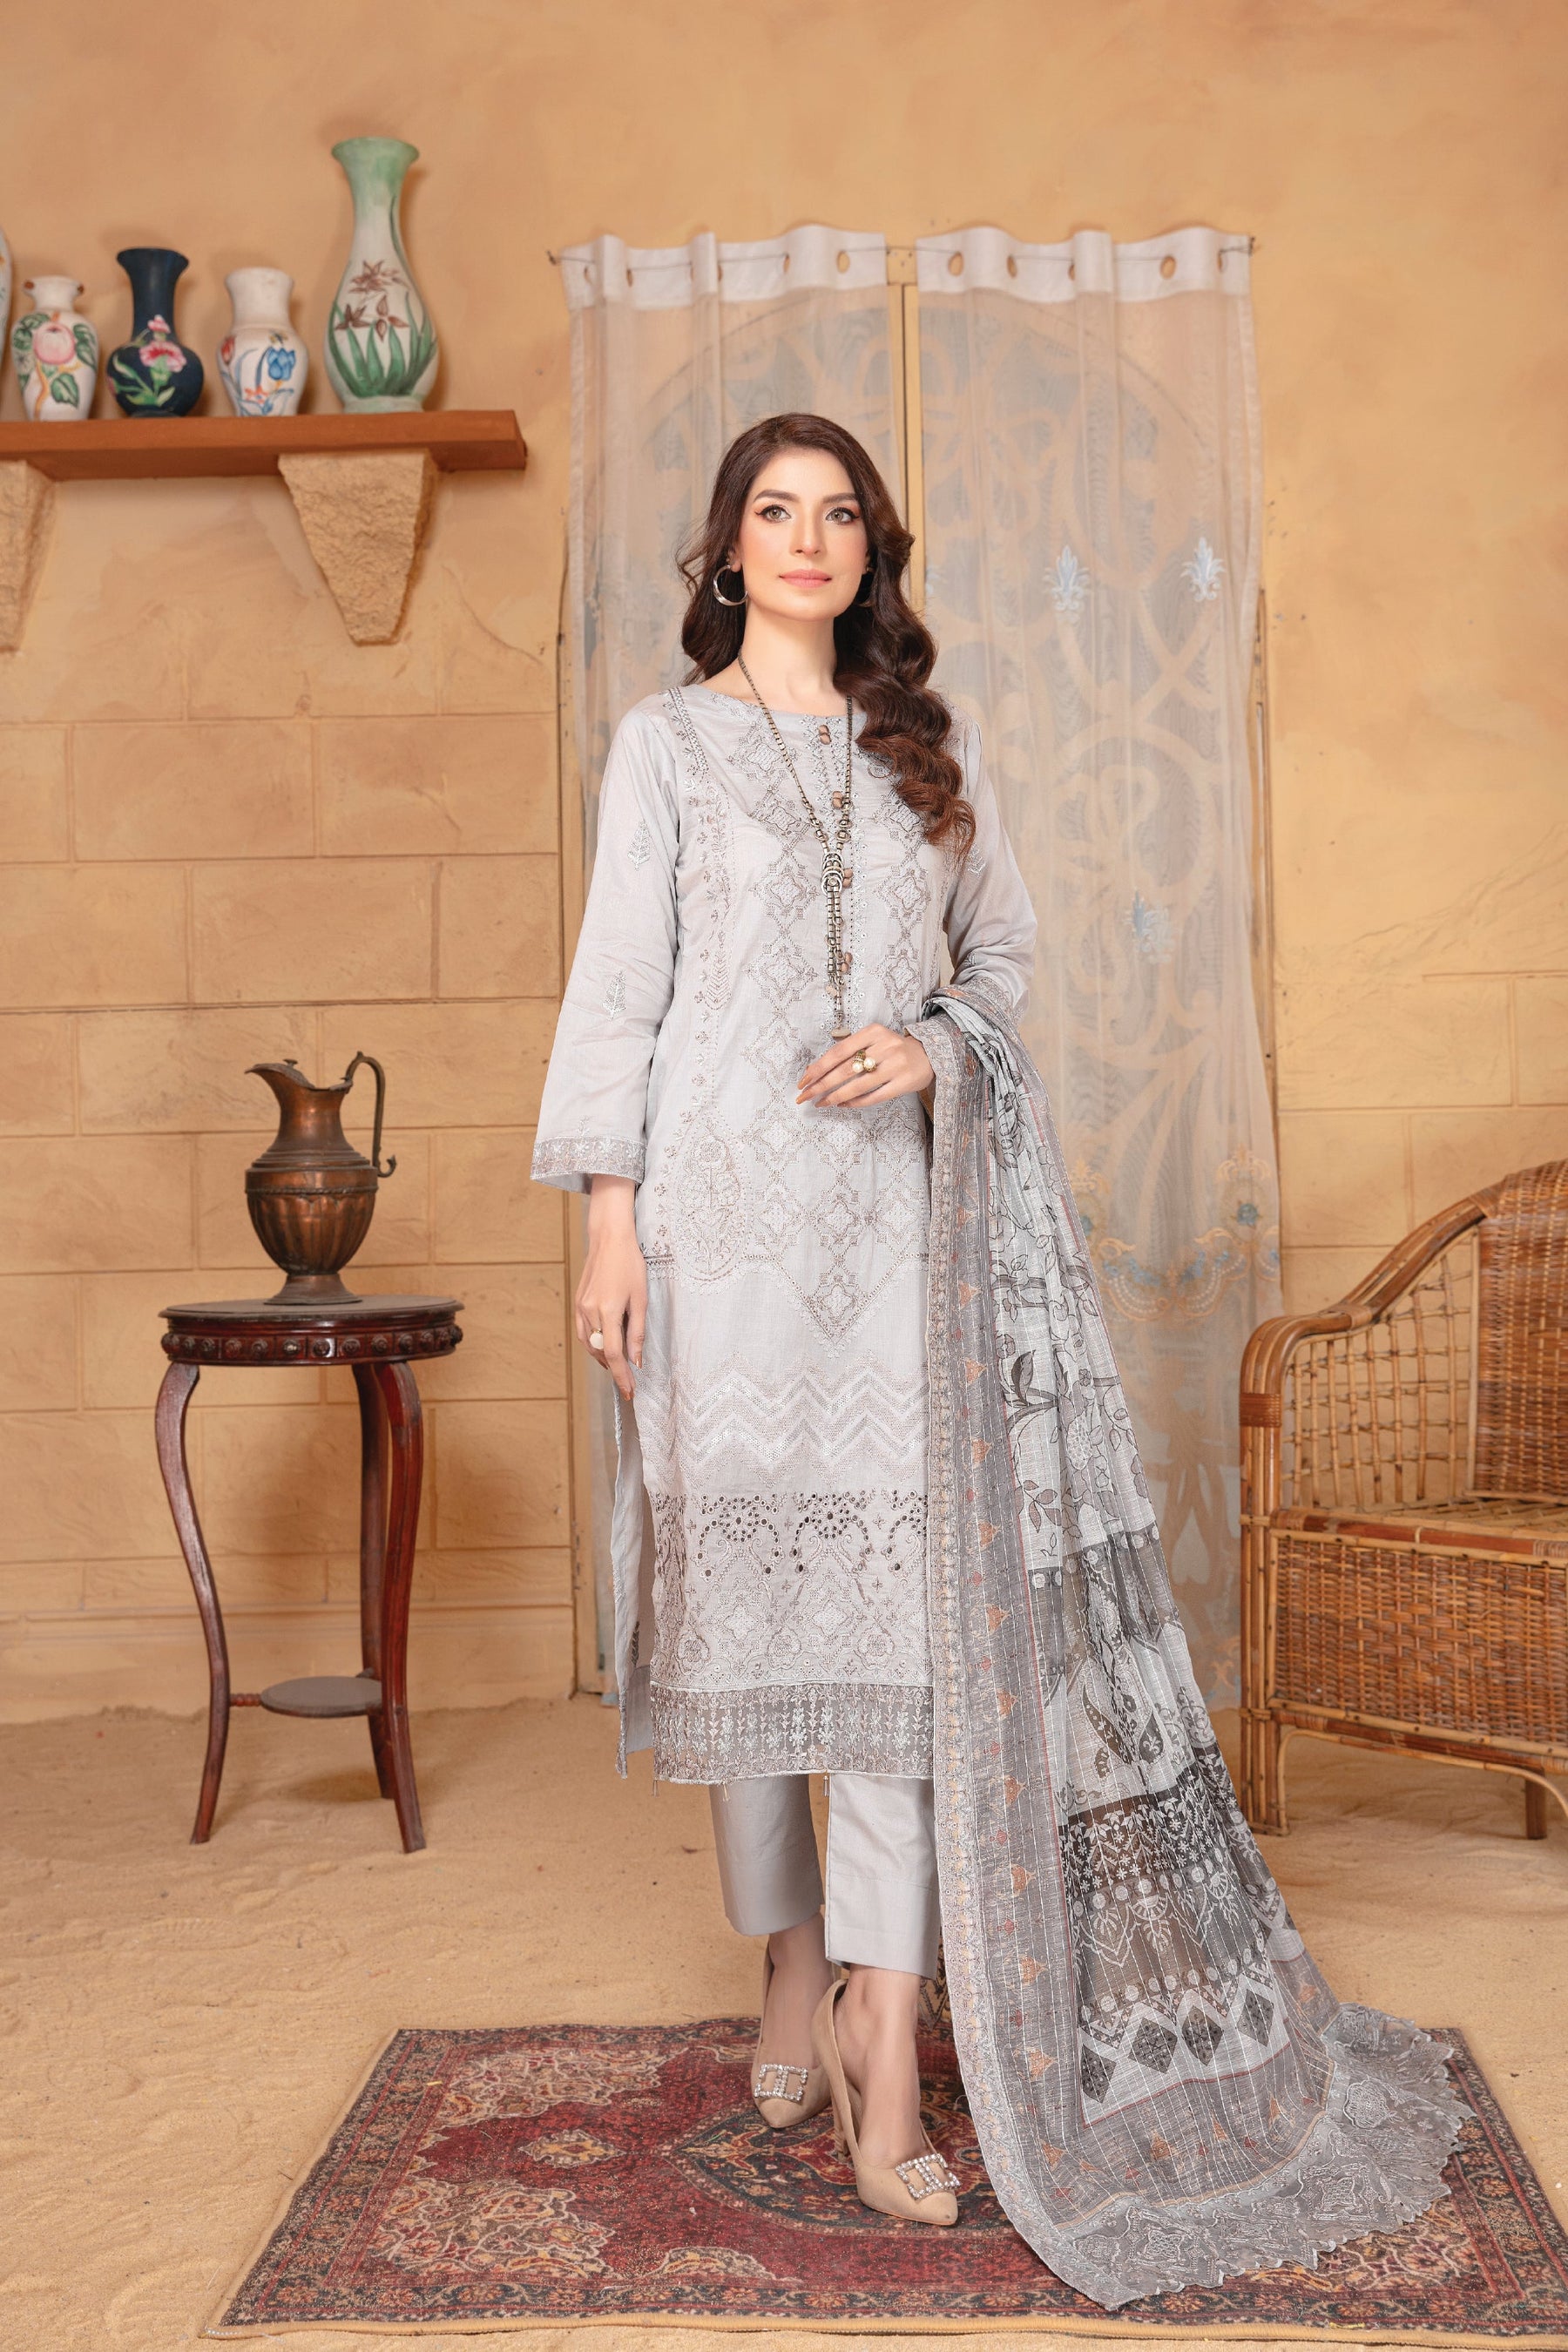 Misl-E-Gull By Mah e Rooh Lawn Embroidered Suit MG-6602 Gray